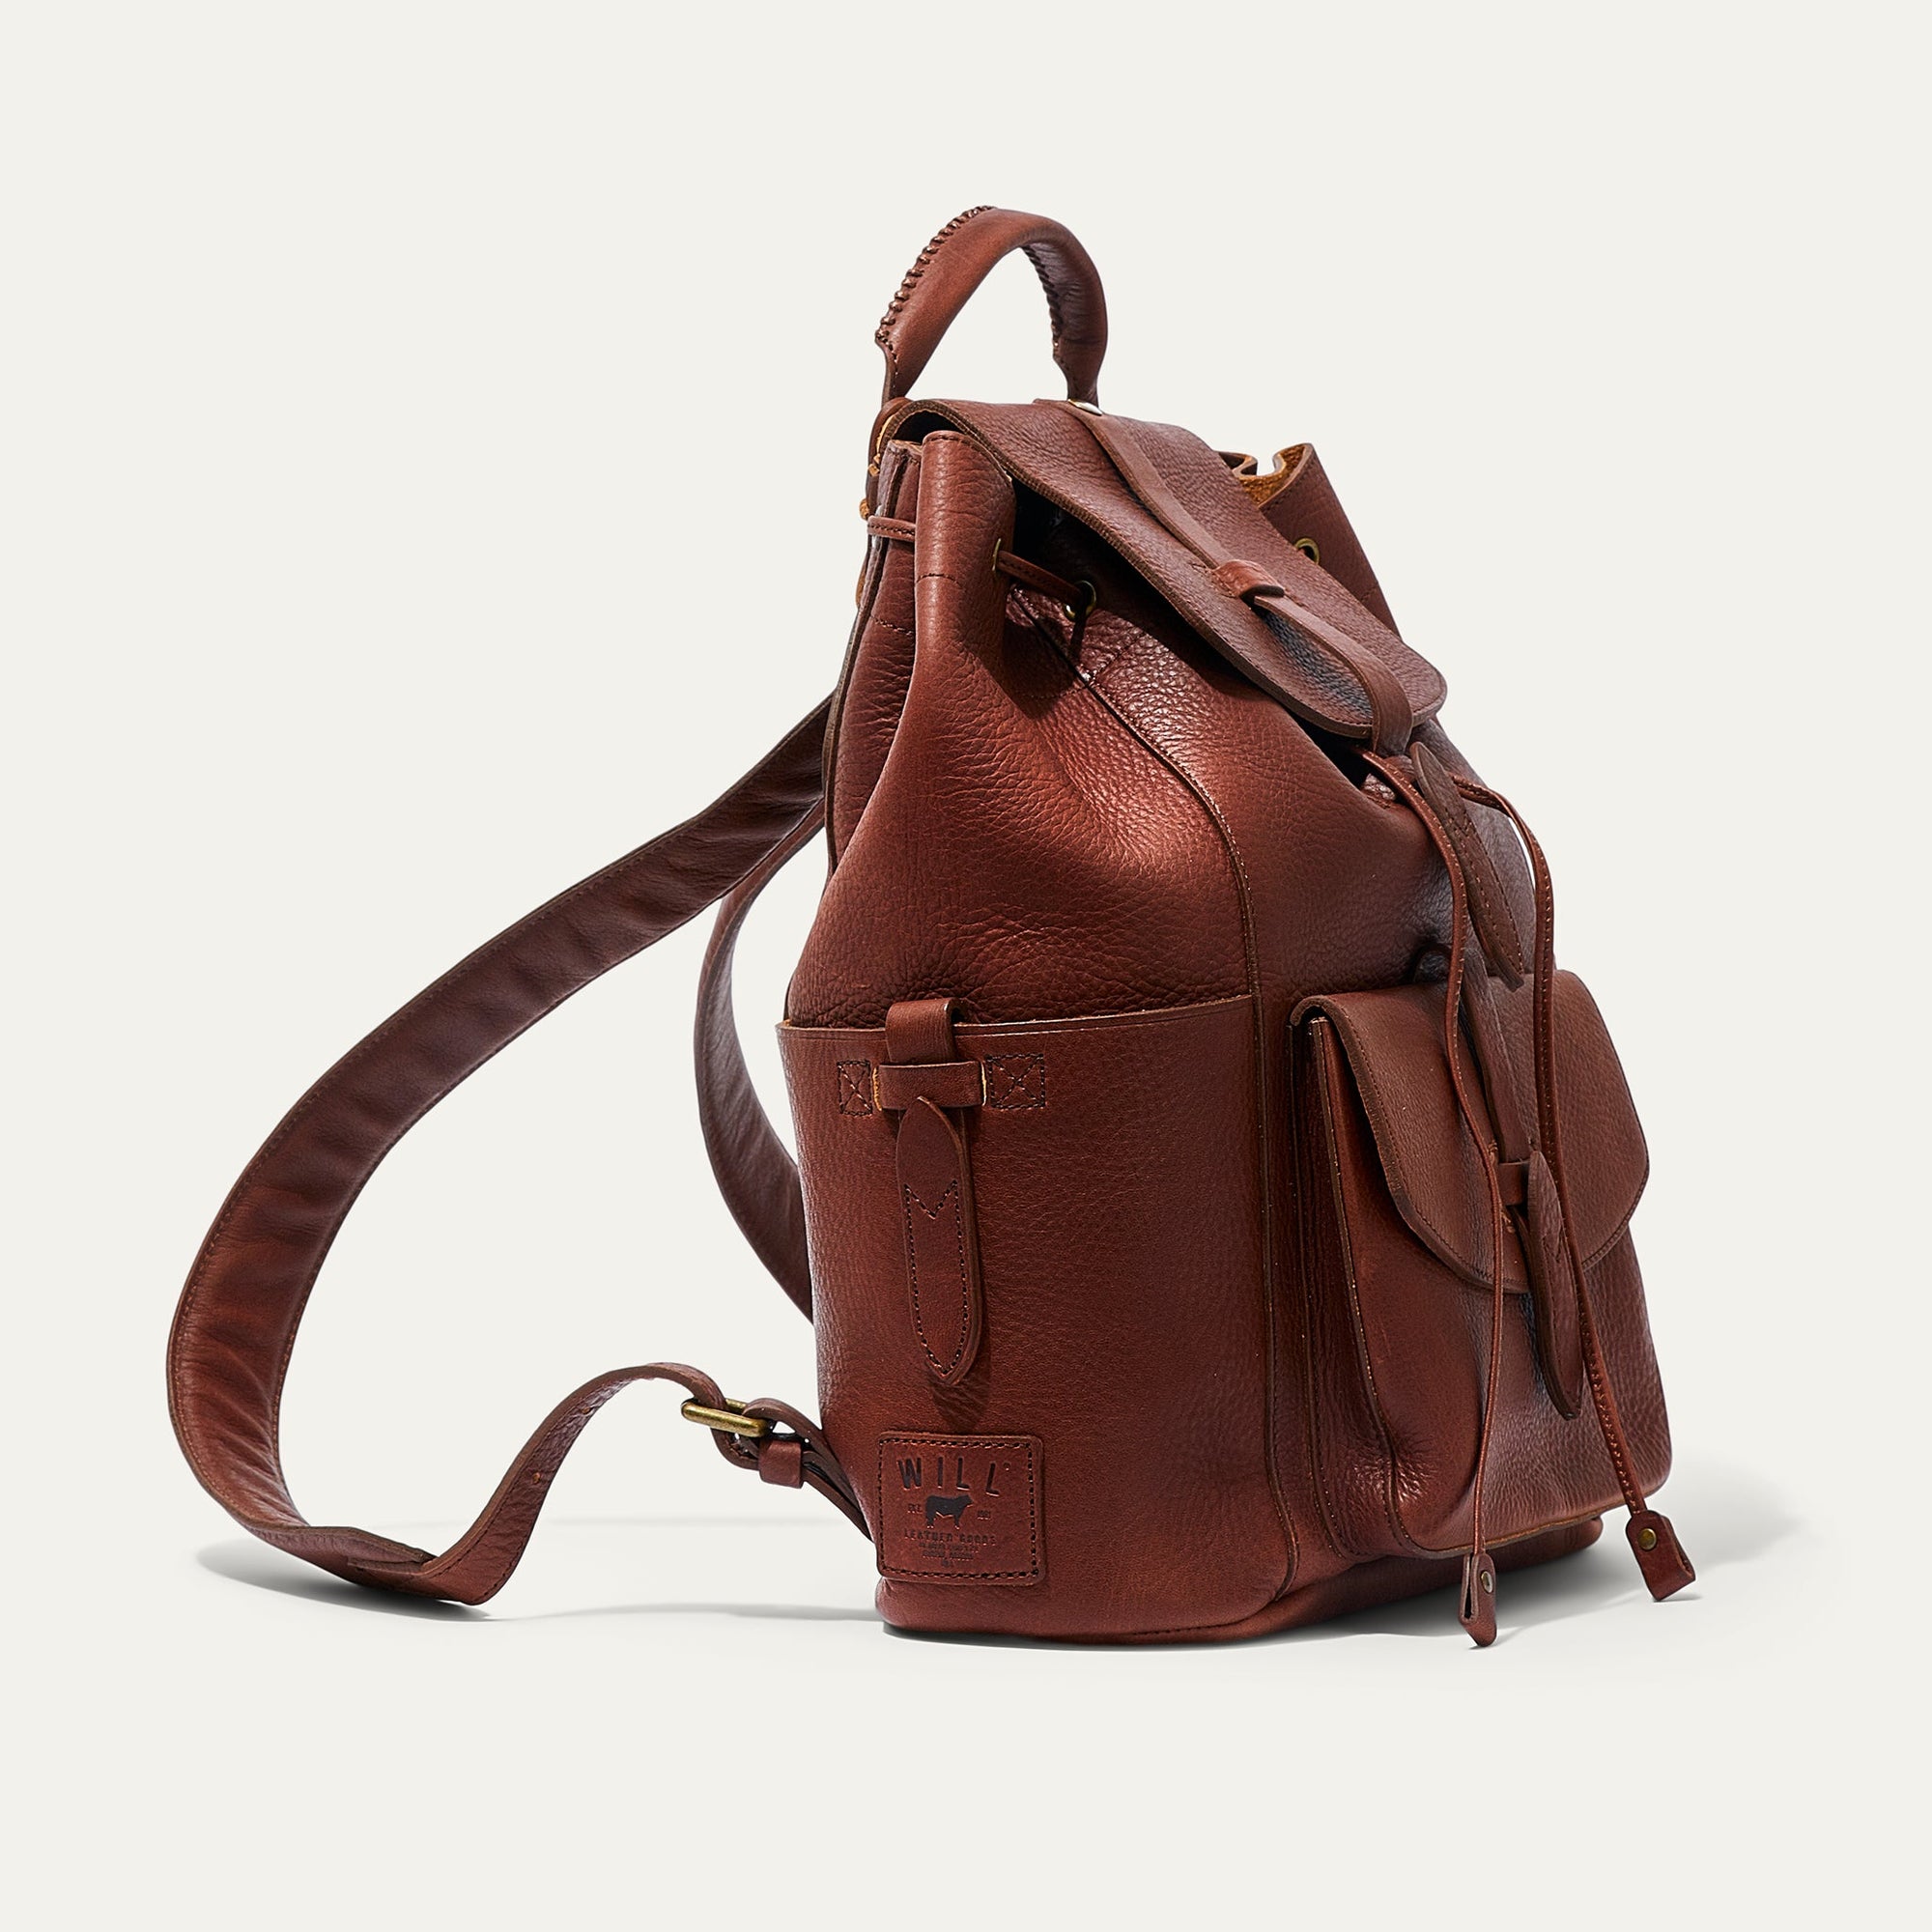 Rainier Leather Backpack in Brown by Will Leather Goods